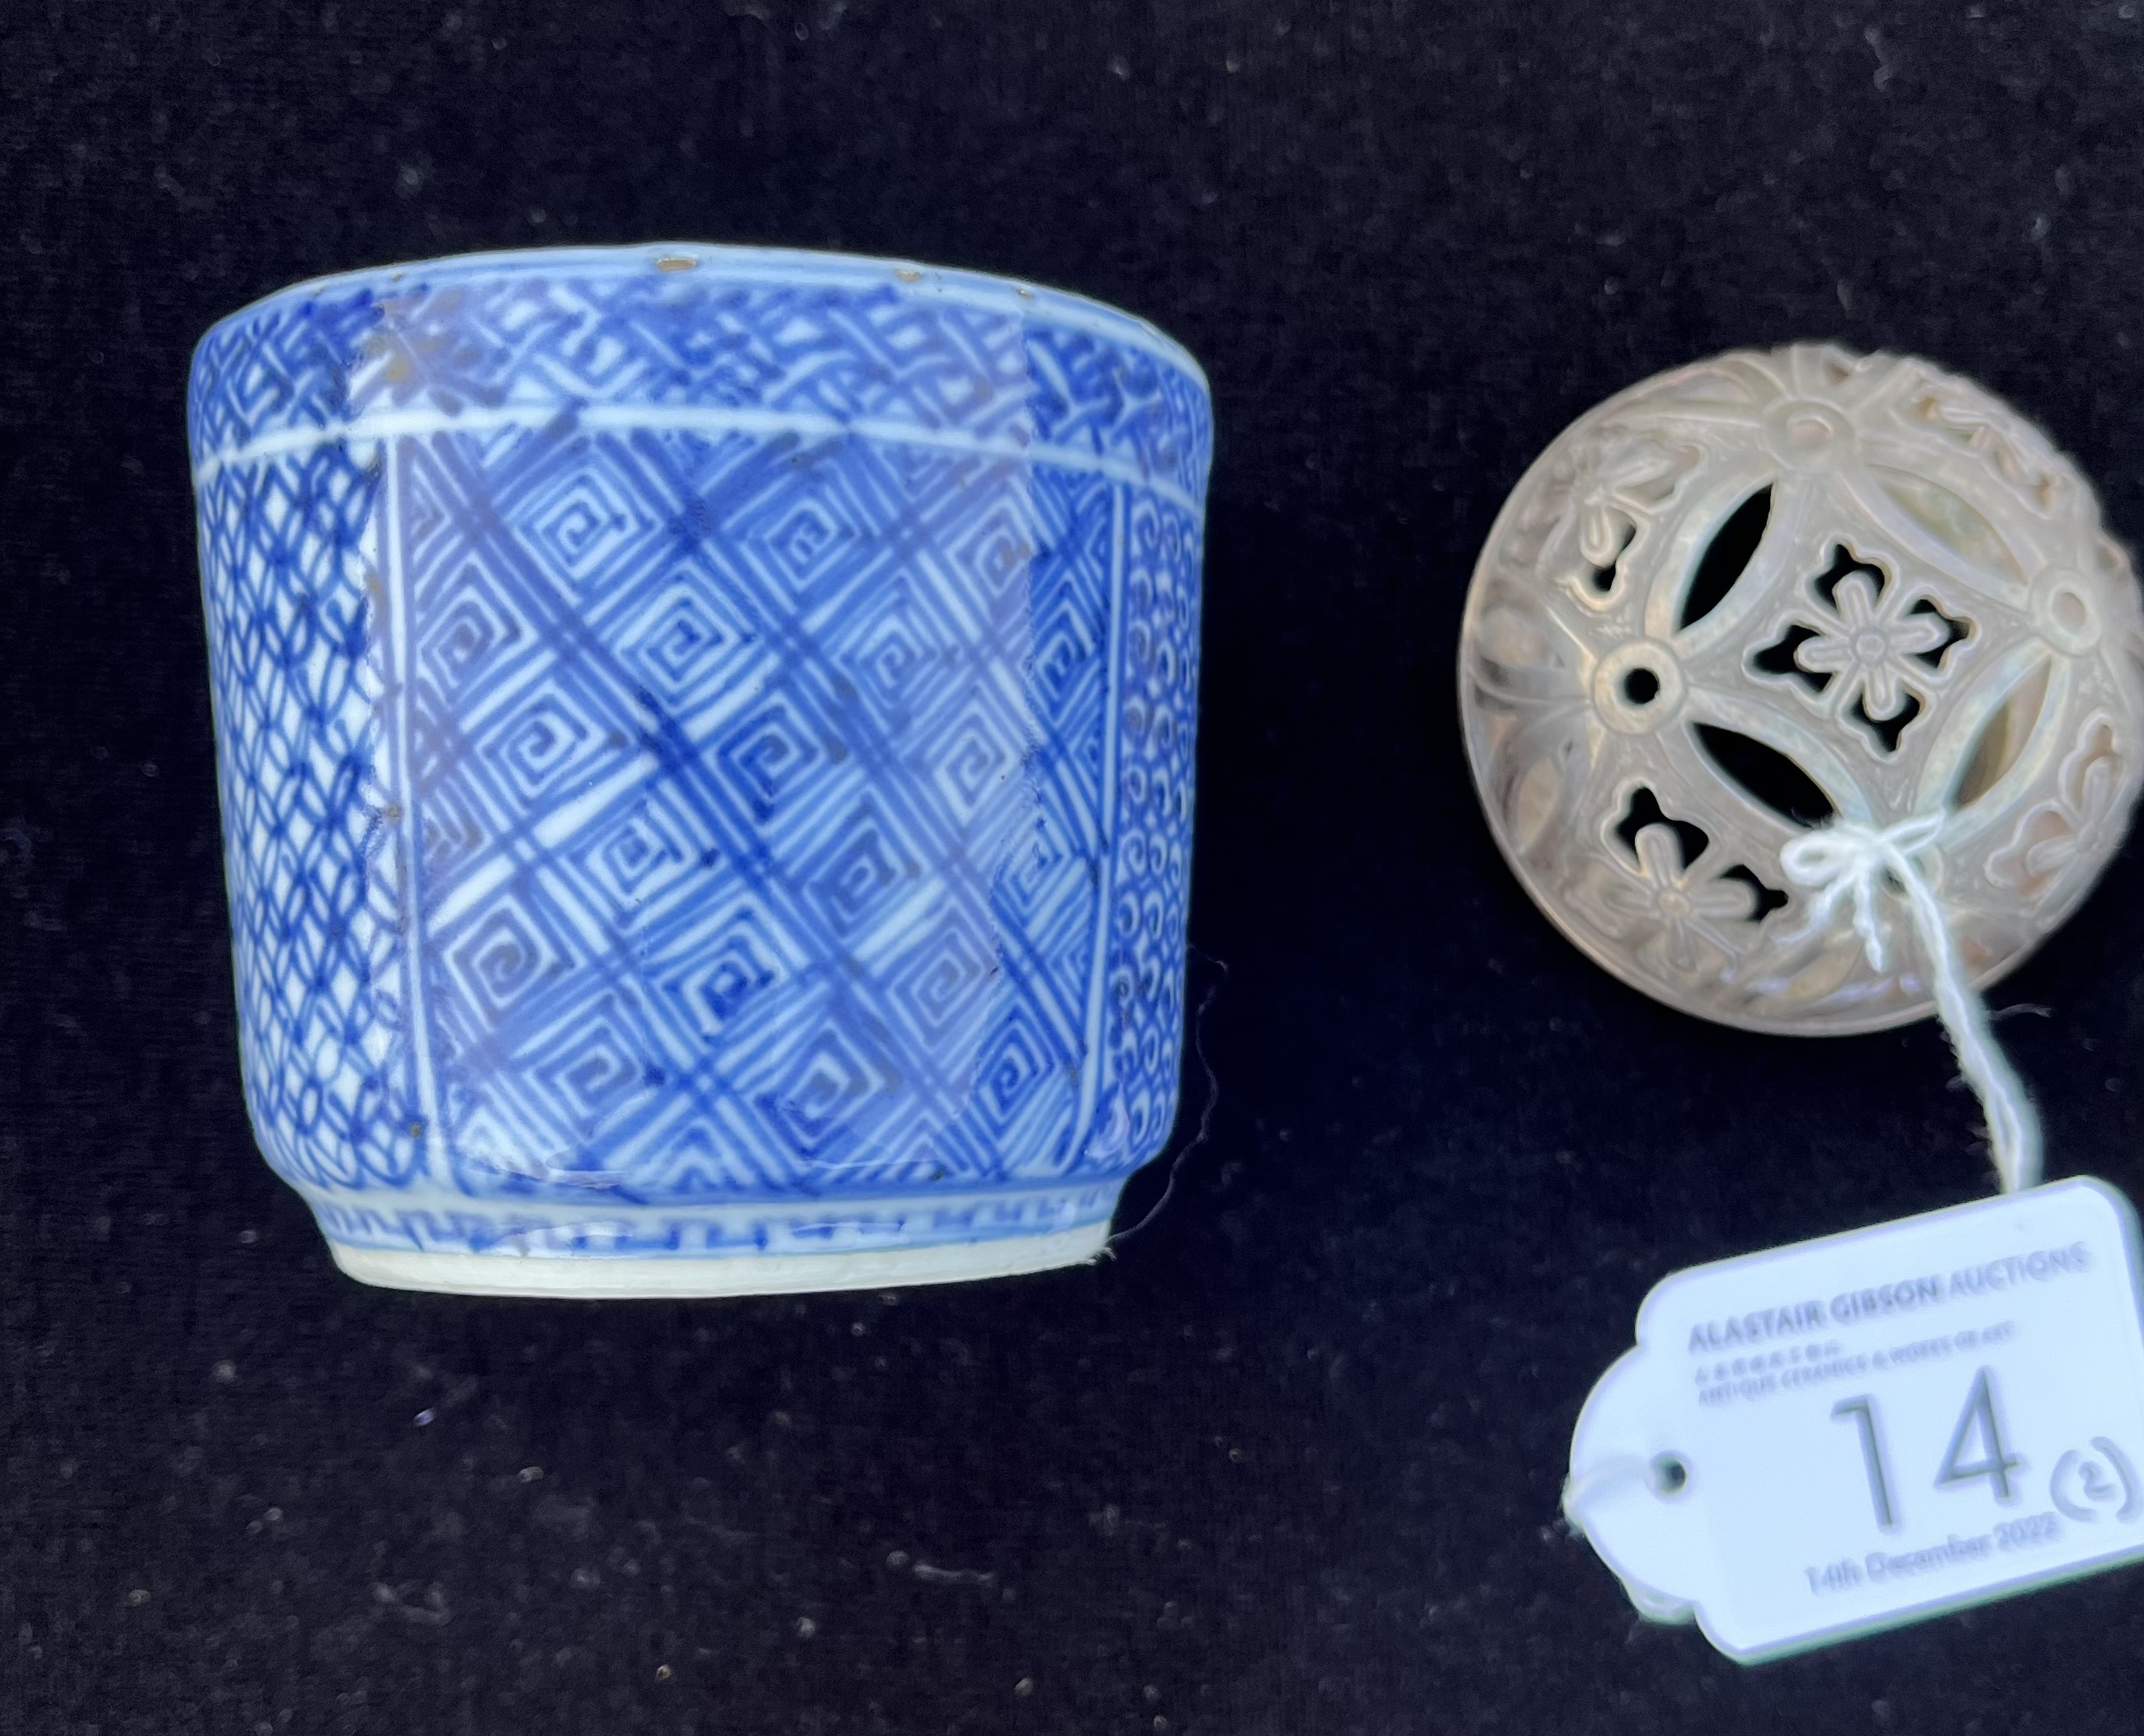 A CHINESE BLUE AND WHITE PORCELAIN INCENSE BURNER, KORO, TIANQI PERIOD, 1621 – 1627 - Image 7 of 10